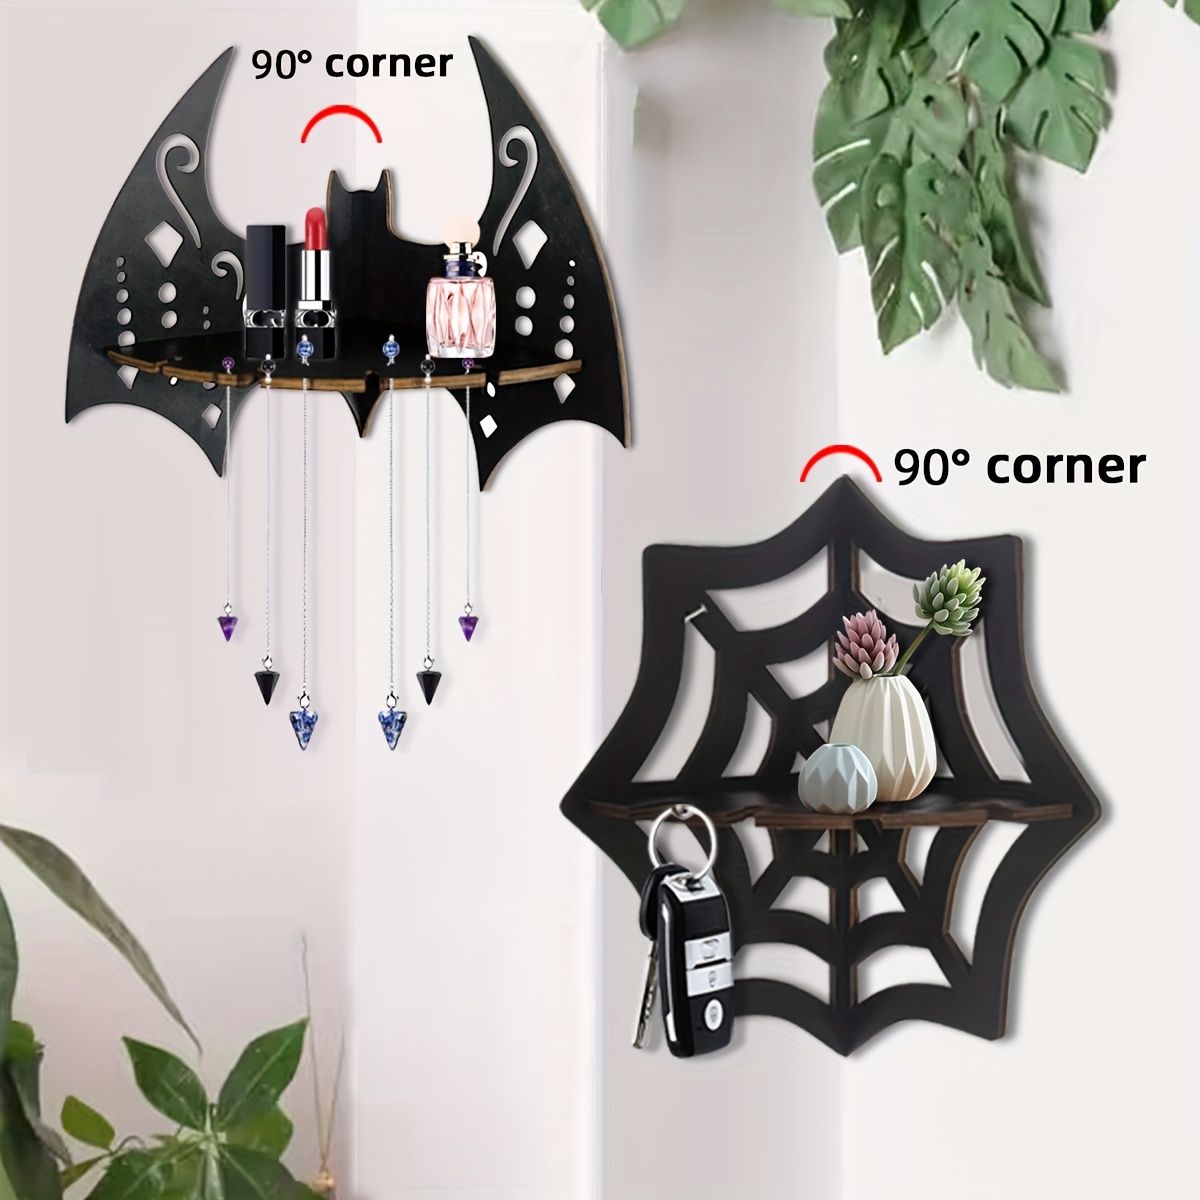 Gothic Gifts Bat Decor Candle - Goth Gifts for Women, Gothic Home Decor, Goth Stuff Room Decor and Goth Decor for Home and Bathroom, Christmas Goth